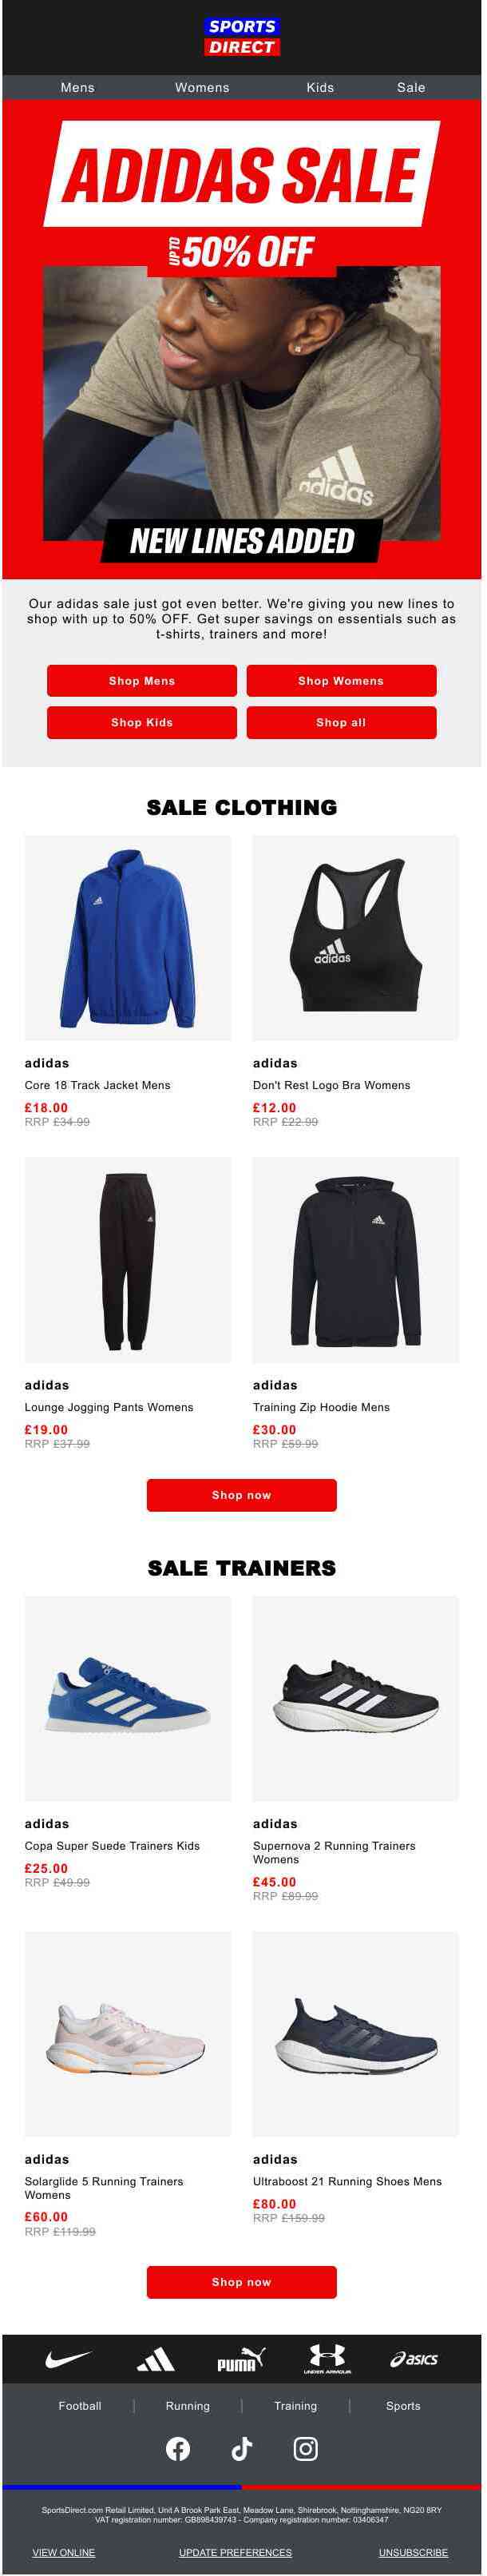 ⚠️ adidas Sale | New lines added ⚠️